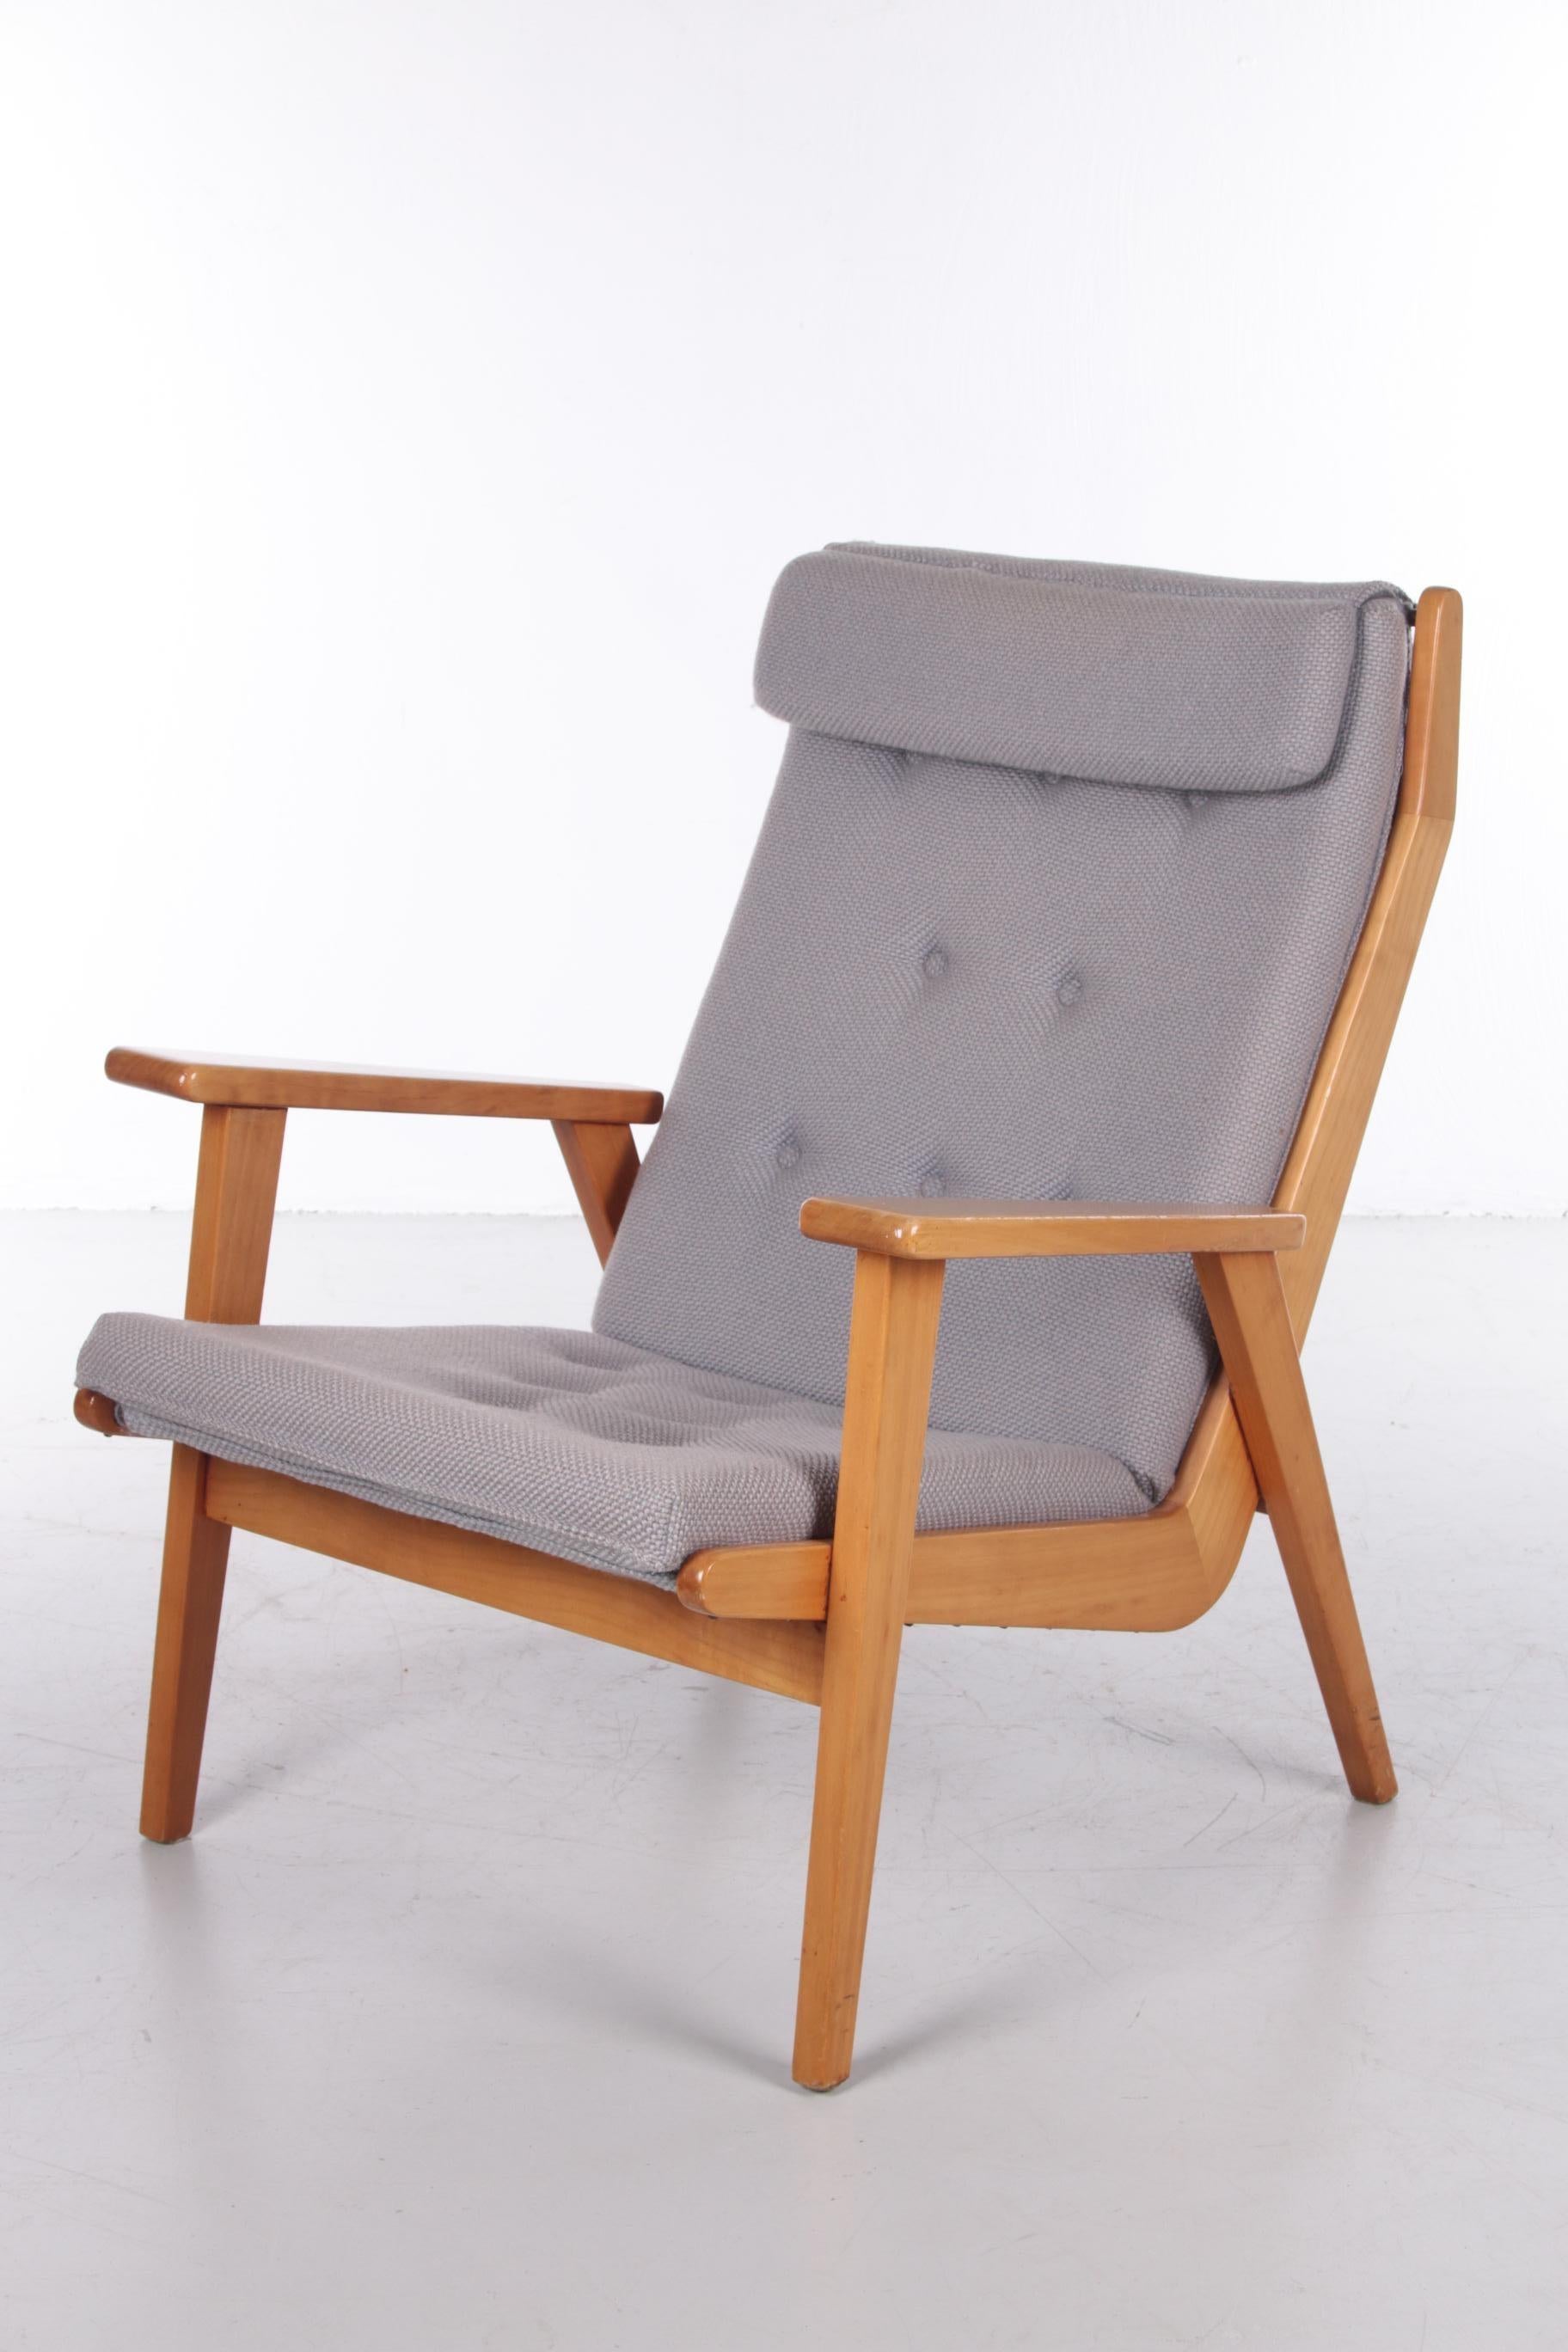 Vintage Rob Parry Lotus Armchair Model 1611

Discover the timeless elegance of the Vintage Rob Parry Lotus armchair Model 1611, an icon of Dutch design from the 1950s. Manufactured by the renowned furniture manufacturer Gelderland, this chair with